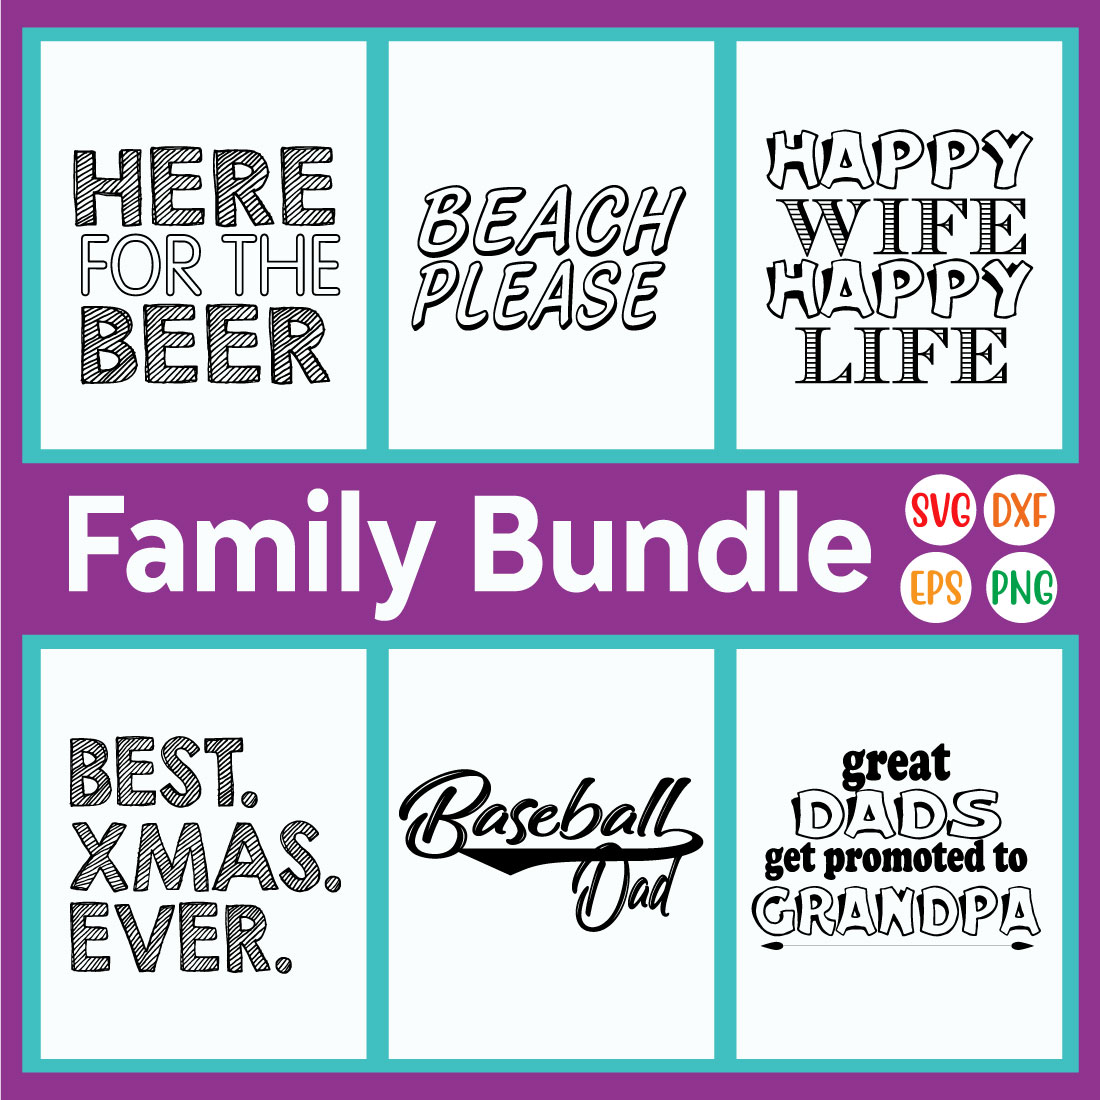 Funny Family Quote T-shirt Designs Vol9 cover image.